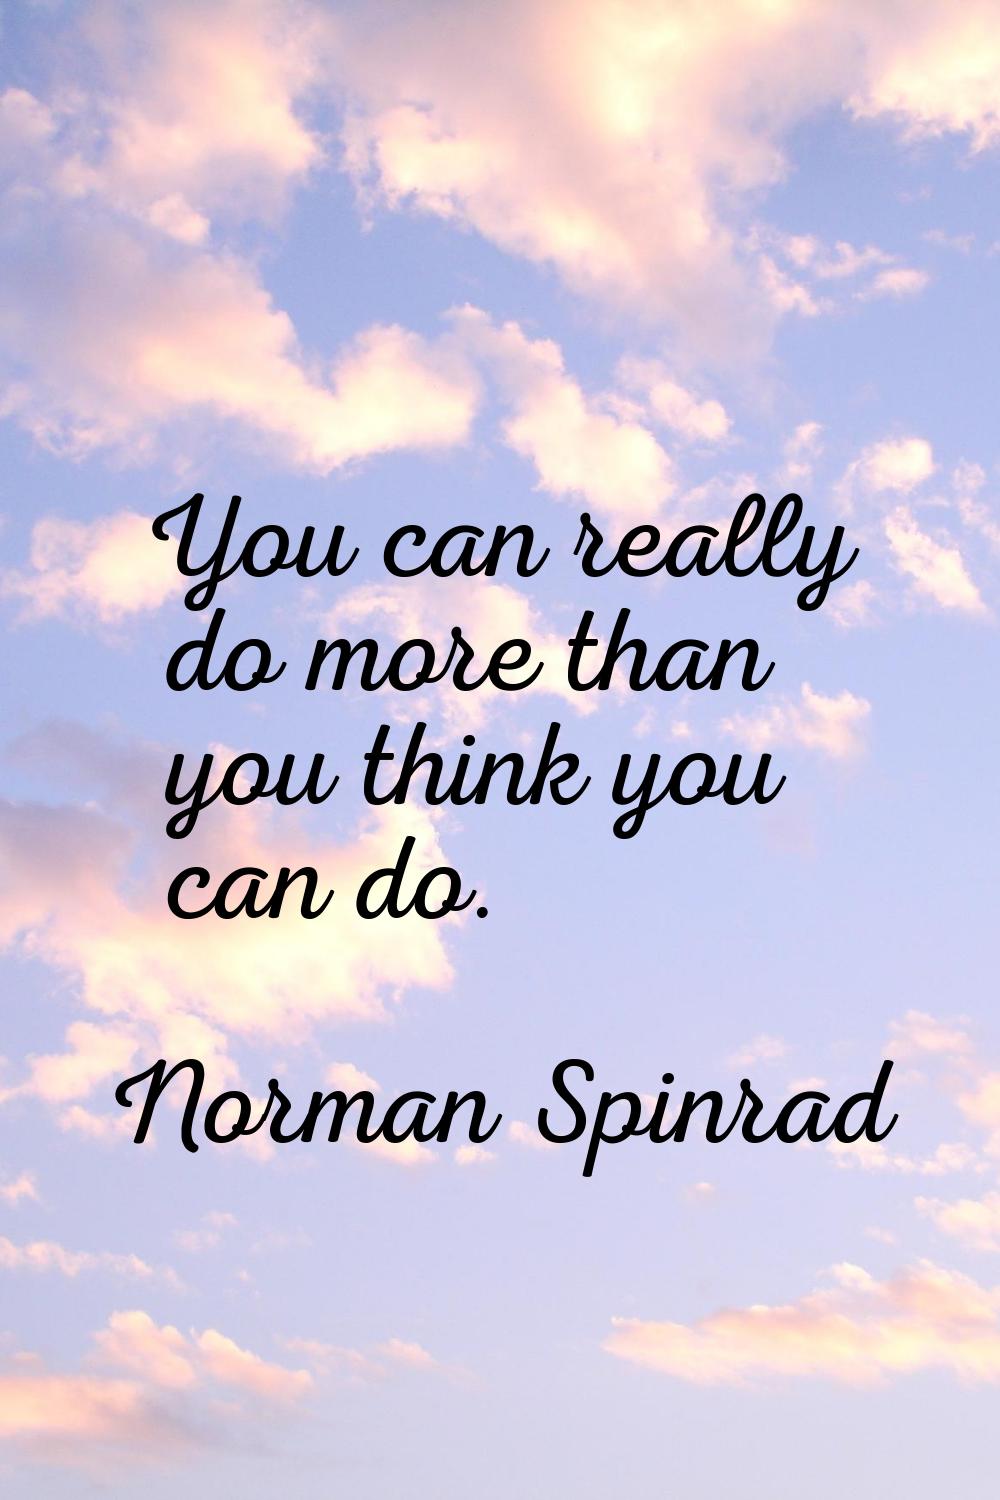 You can really do more than you think you can do.